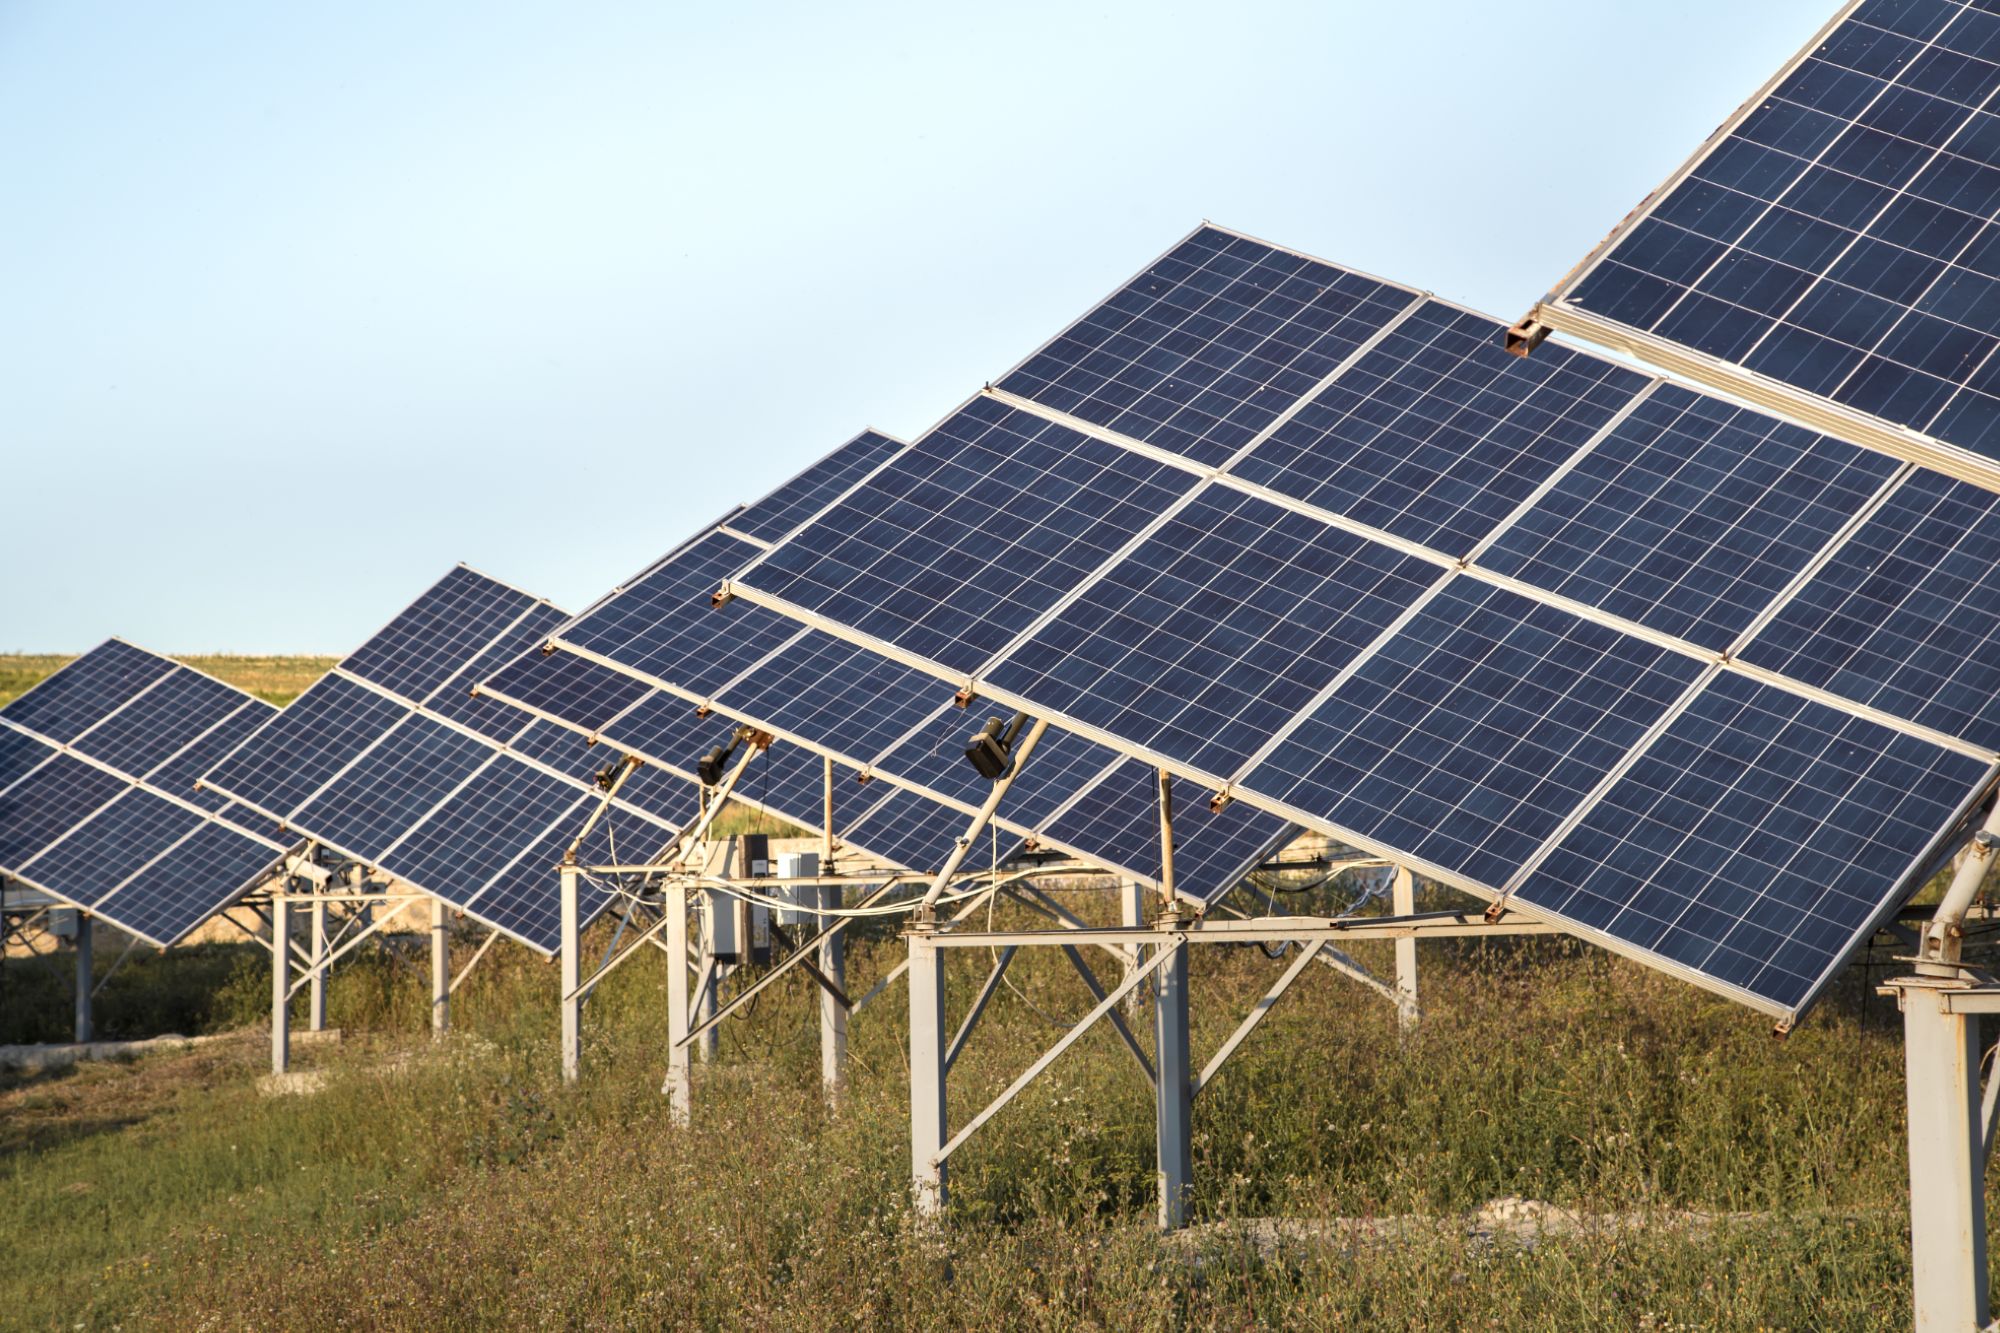 Apraava Energy secures 250 MW solar project in Rajasthan